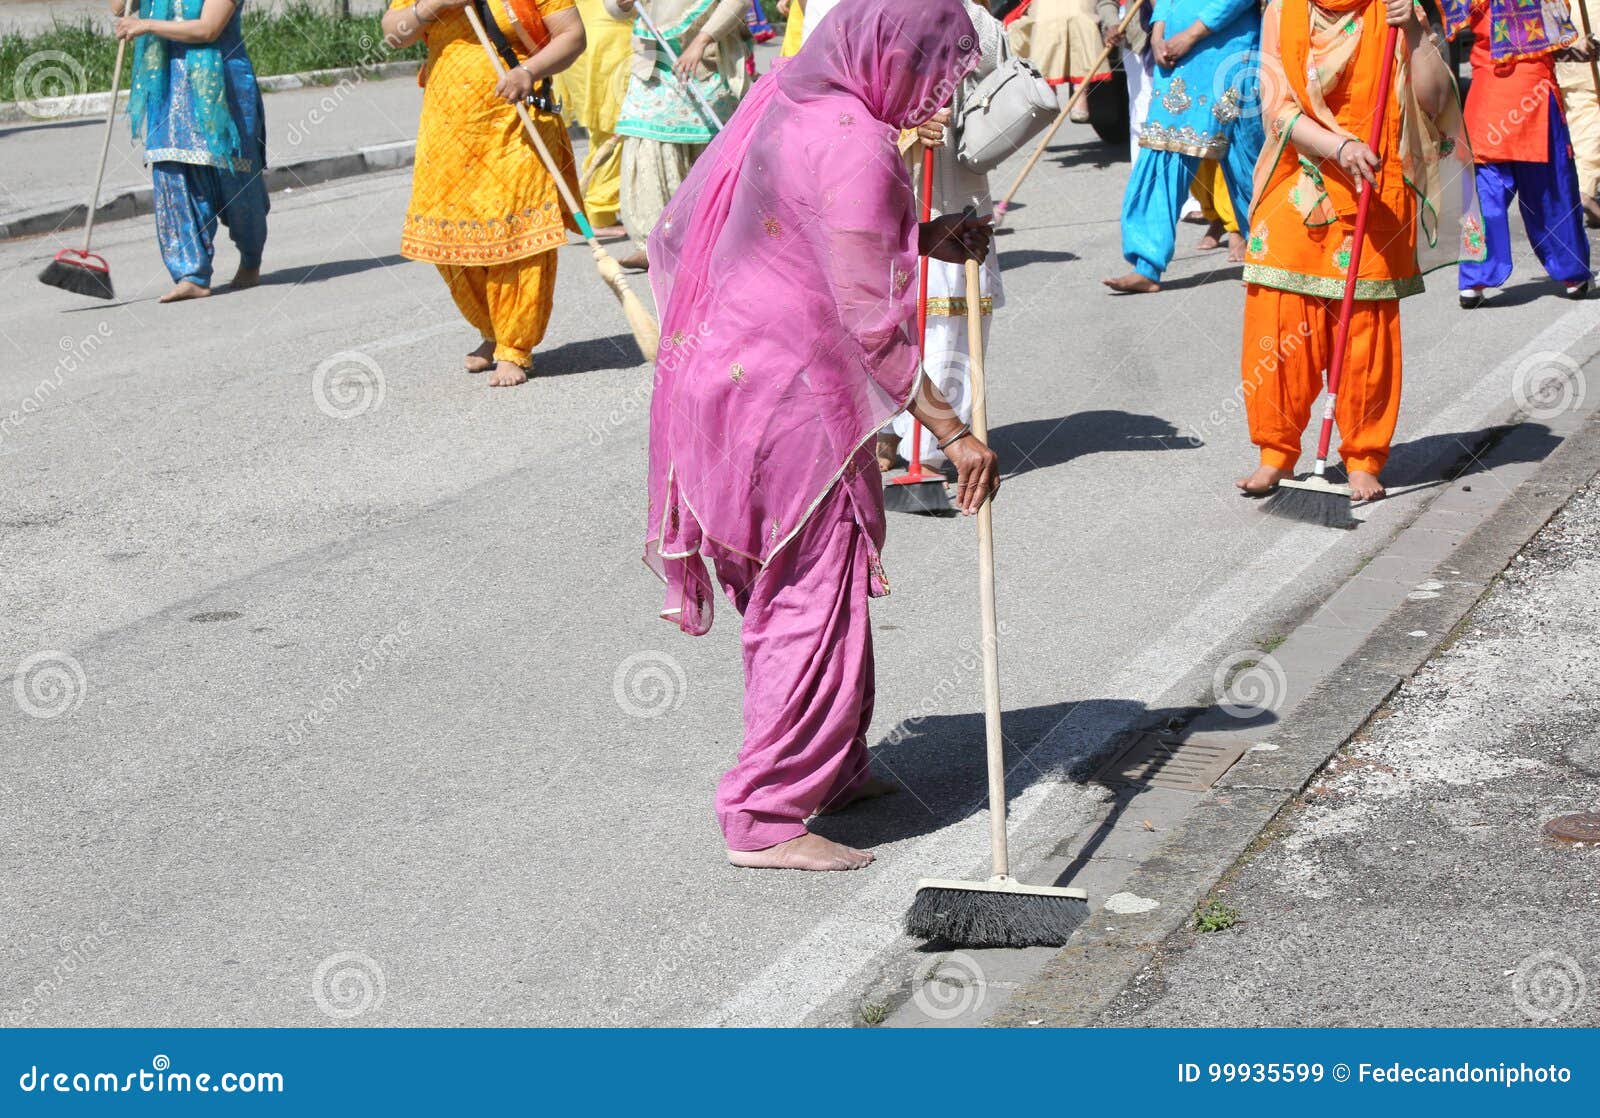 Sikh Religion Women During The Ceremony While Sweeping The Str